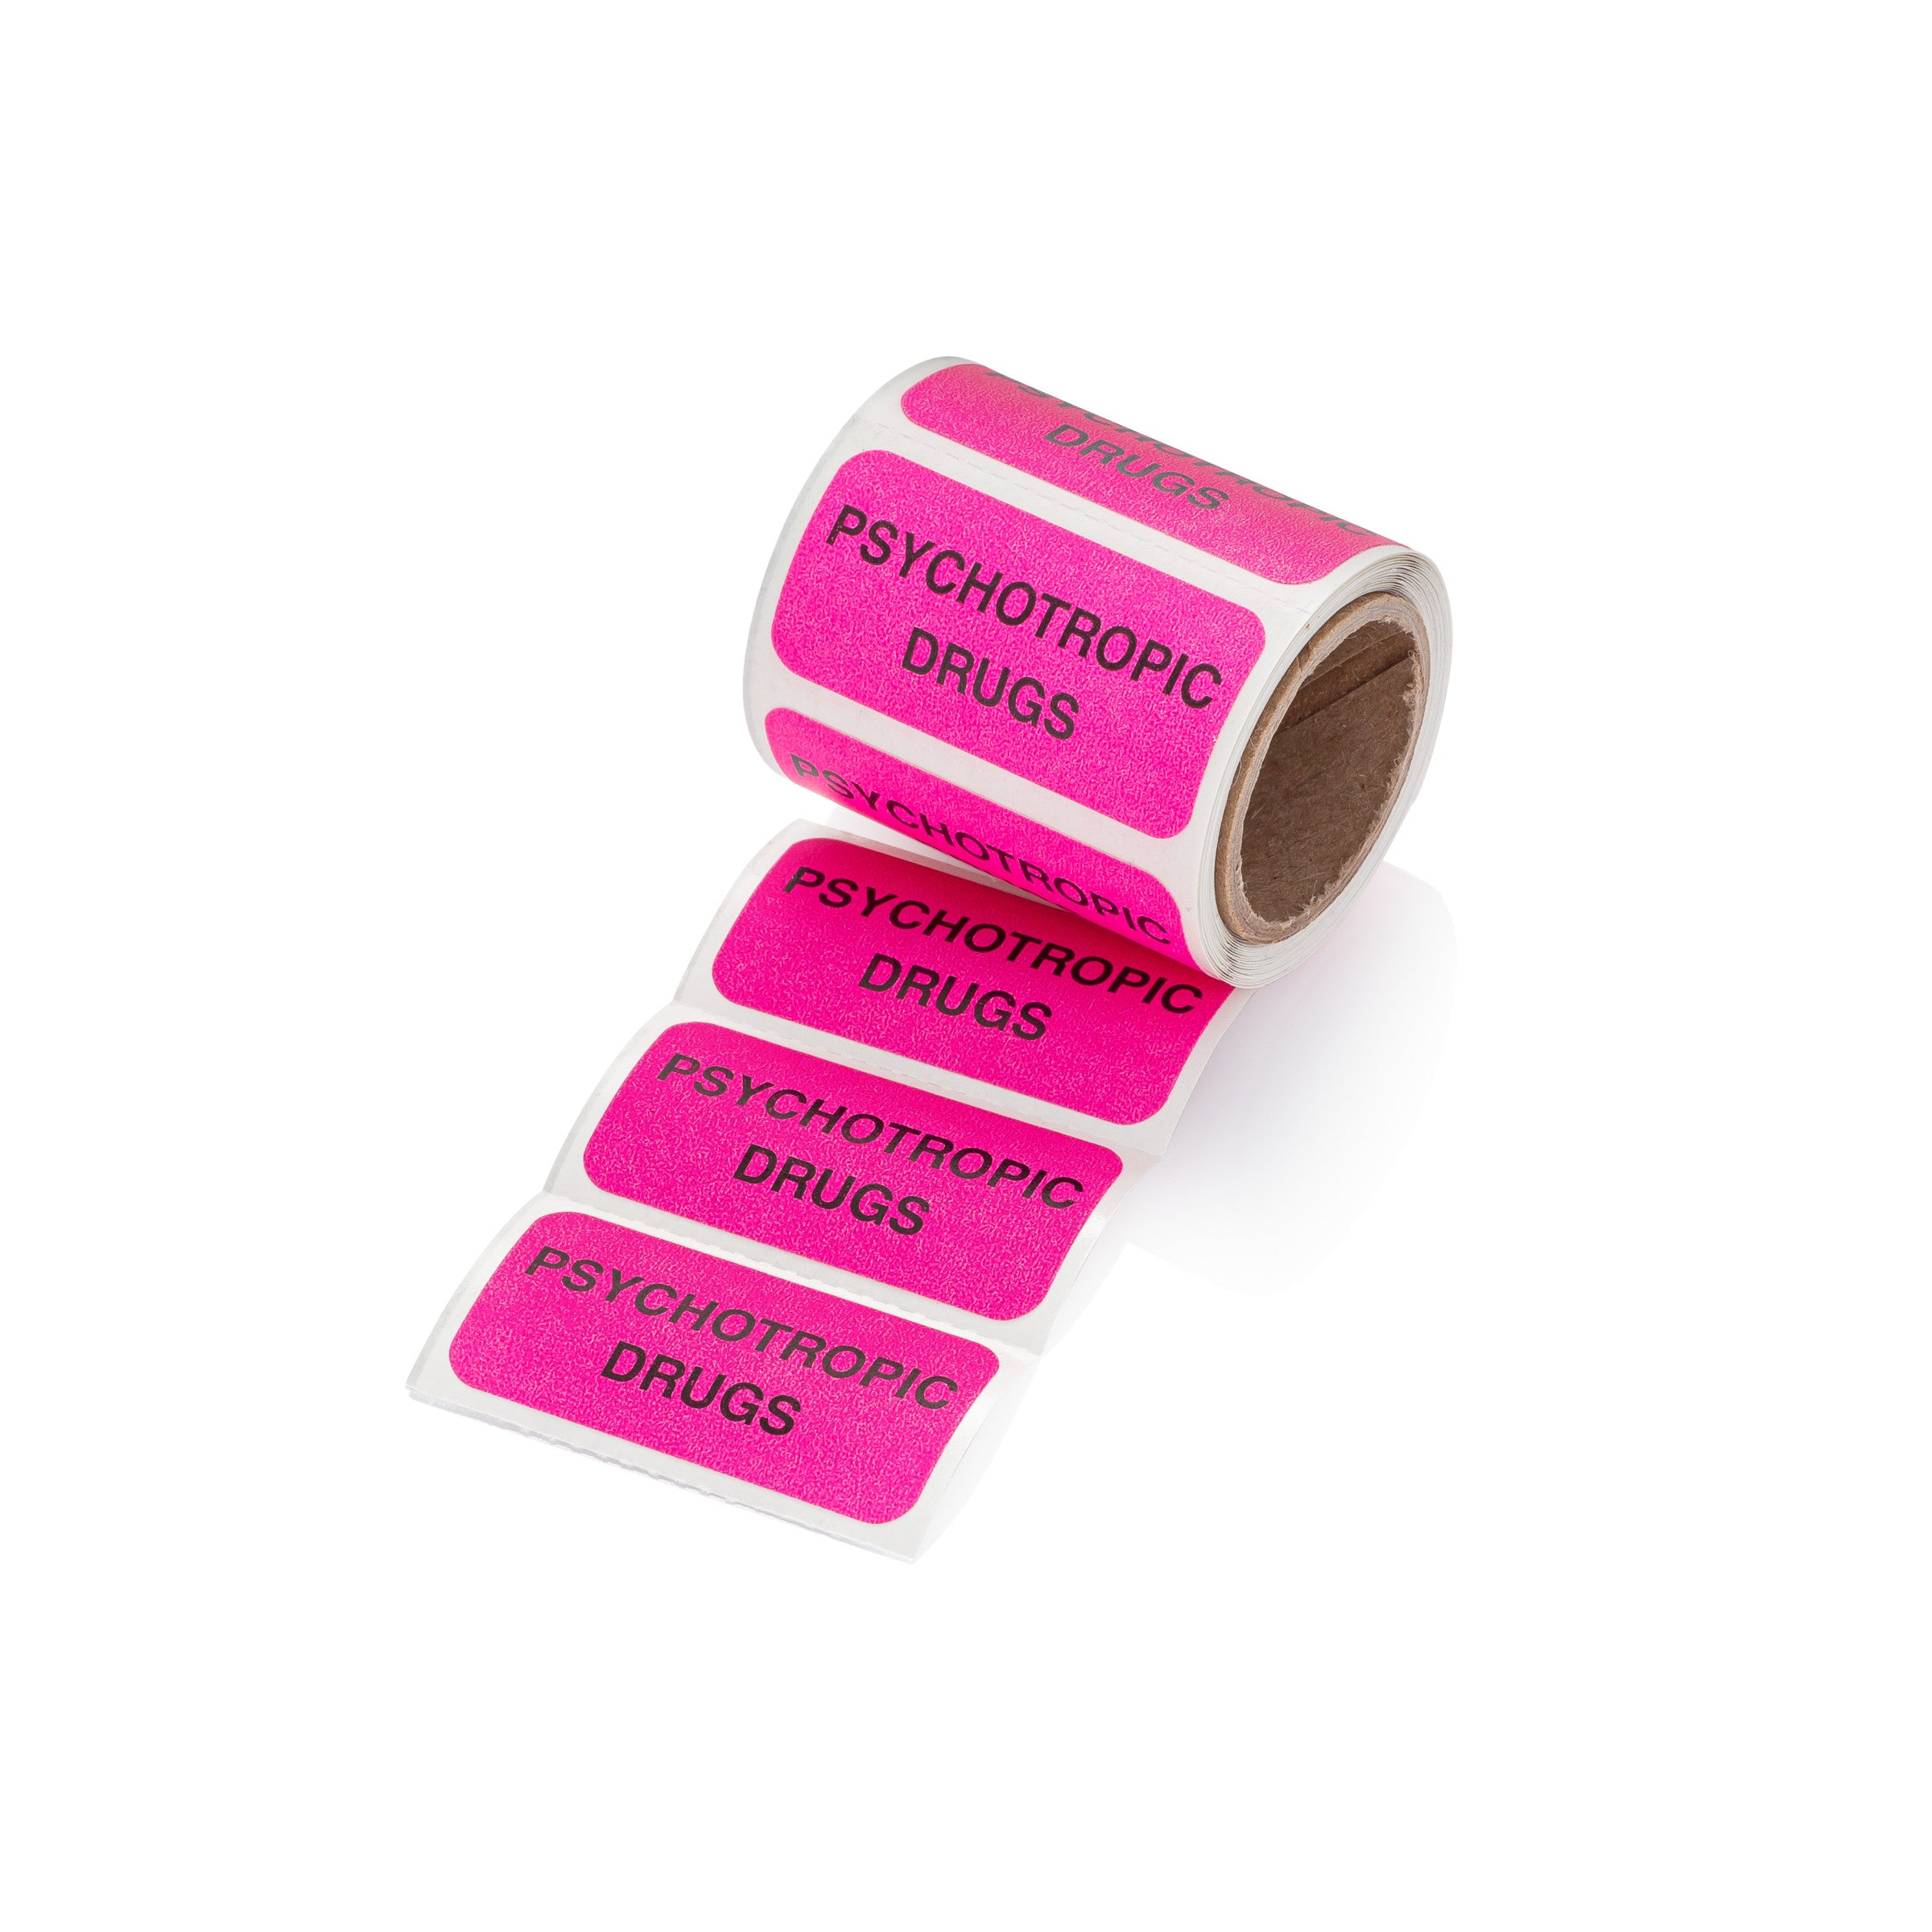 Psychotropic Drugs Alert and Instruction Labels, Pink, W1.5" x H.75" (Roll of 100)